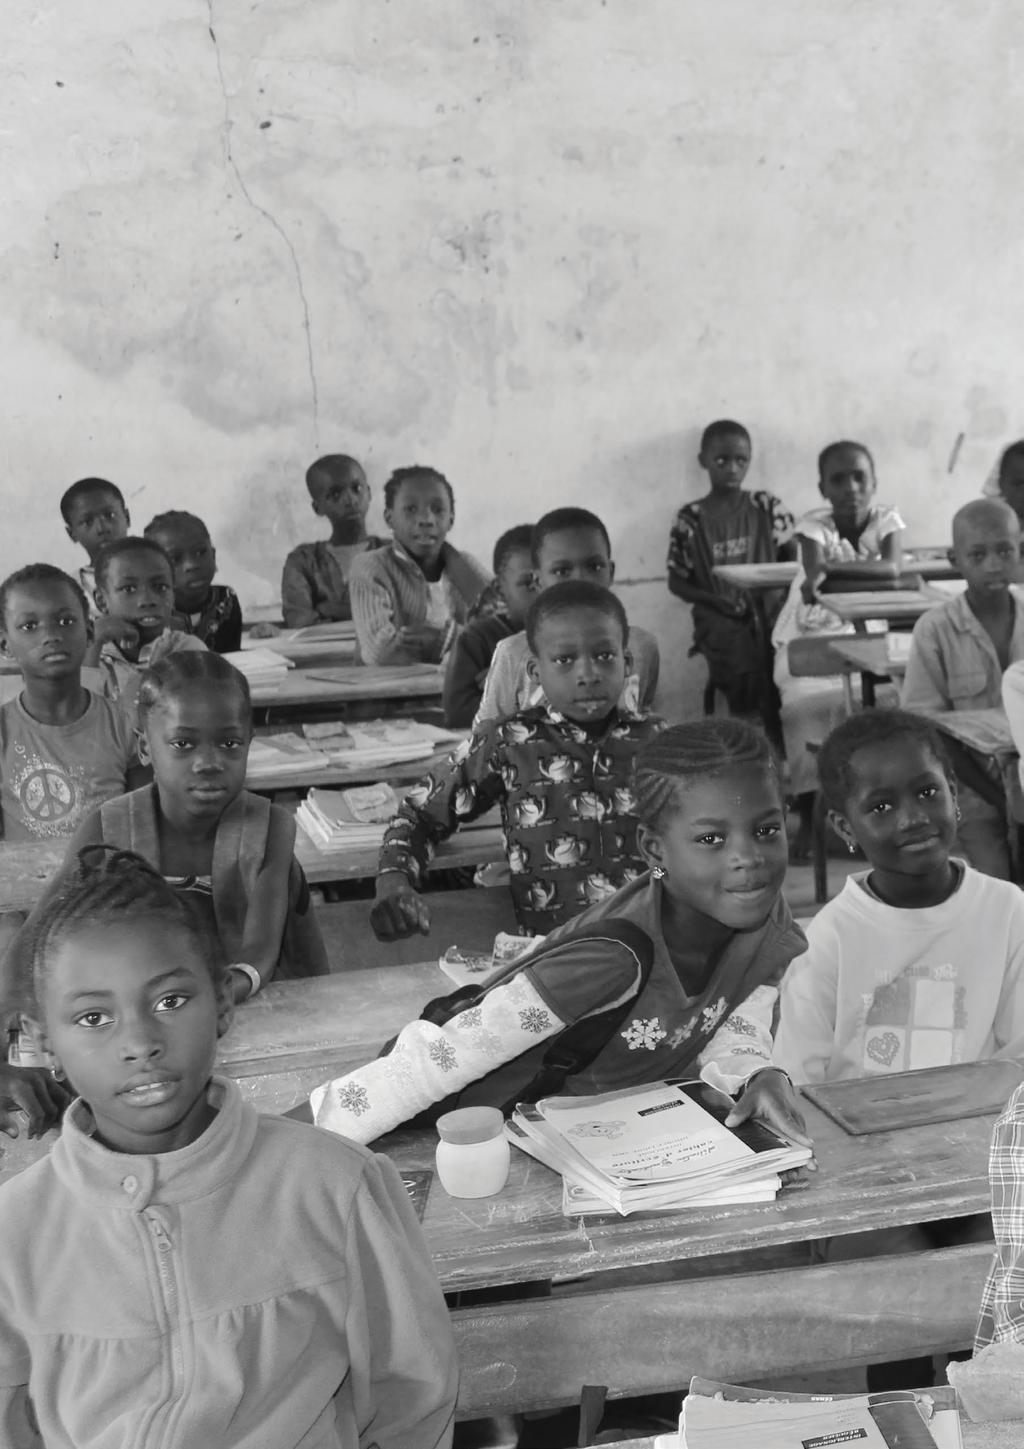 MCA Senegal has built a brand new elementary school with six separate classrooms, an administrative block, a dining hall, separate toilets for girls and boys, toilets for staff, and a two meter high